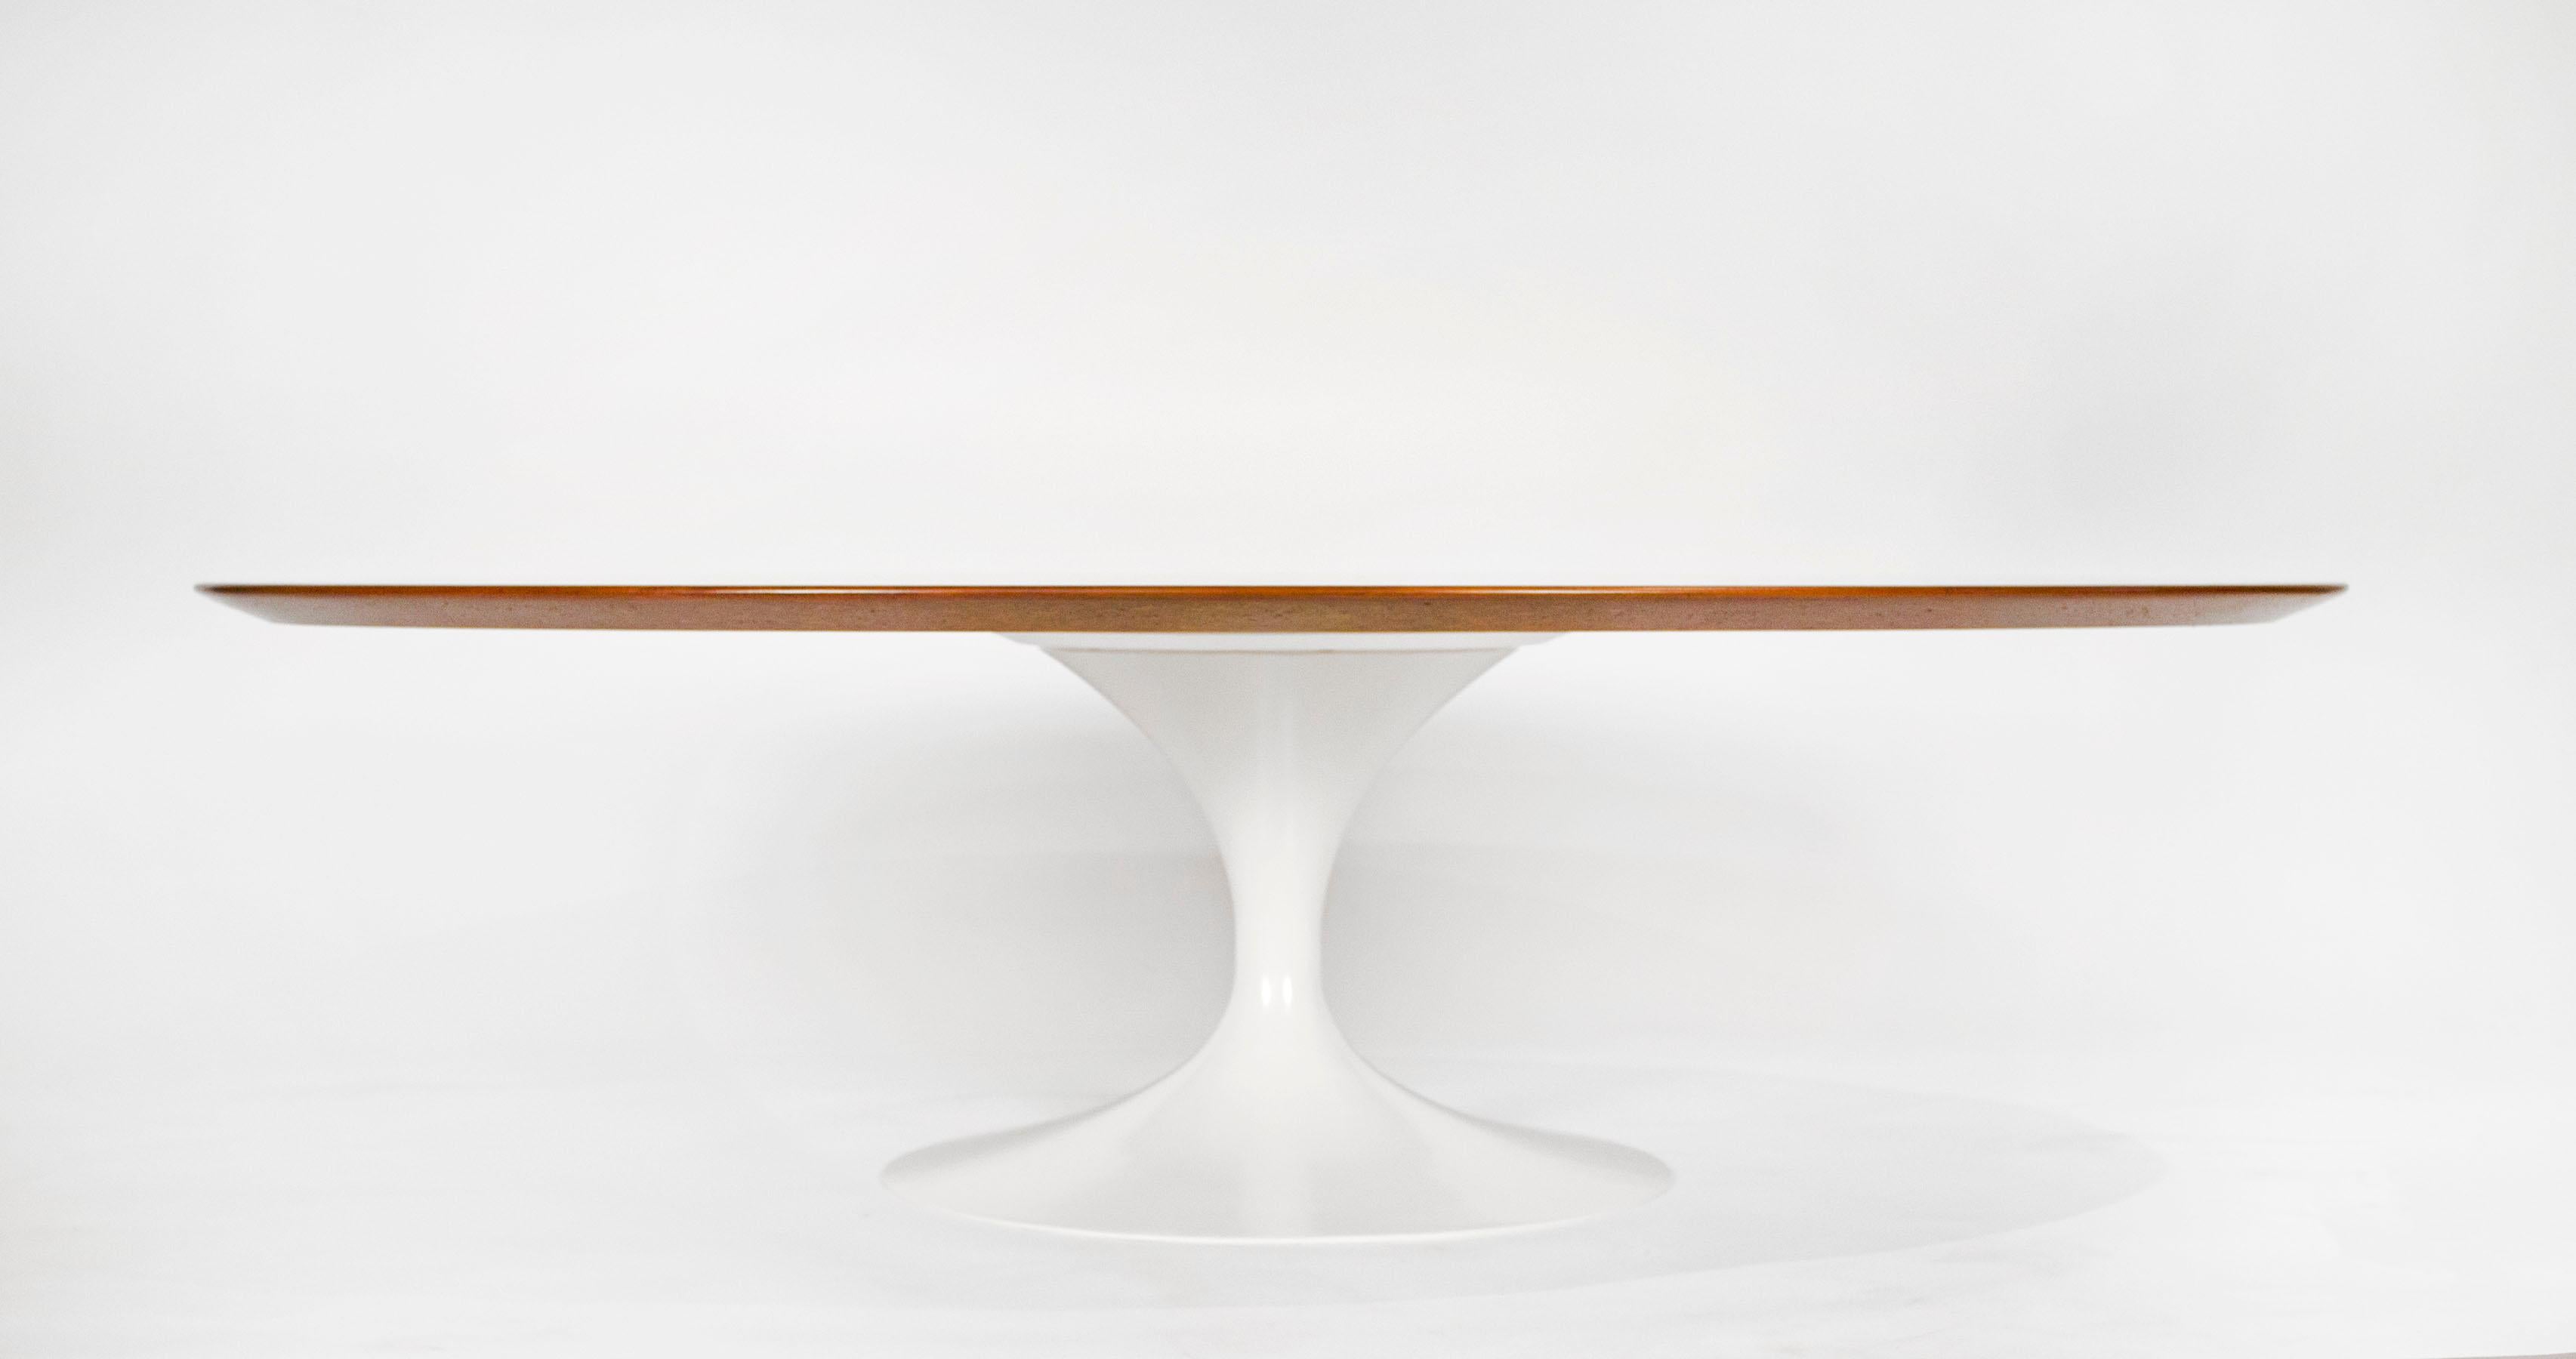 Early 1960s Saarinen coffee table manufactured by Knoll. Beautiful walnut top with satin lacquered base in antique white.